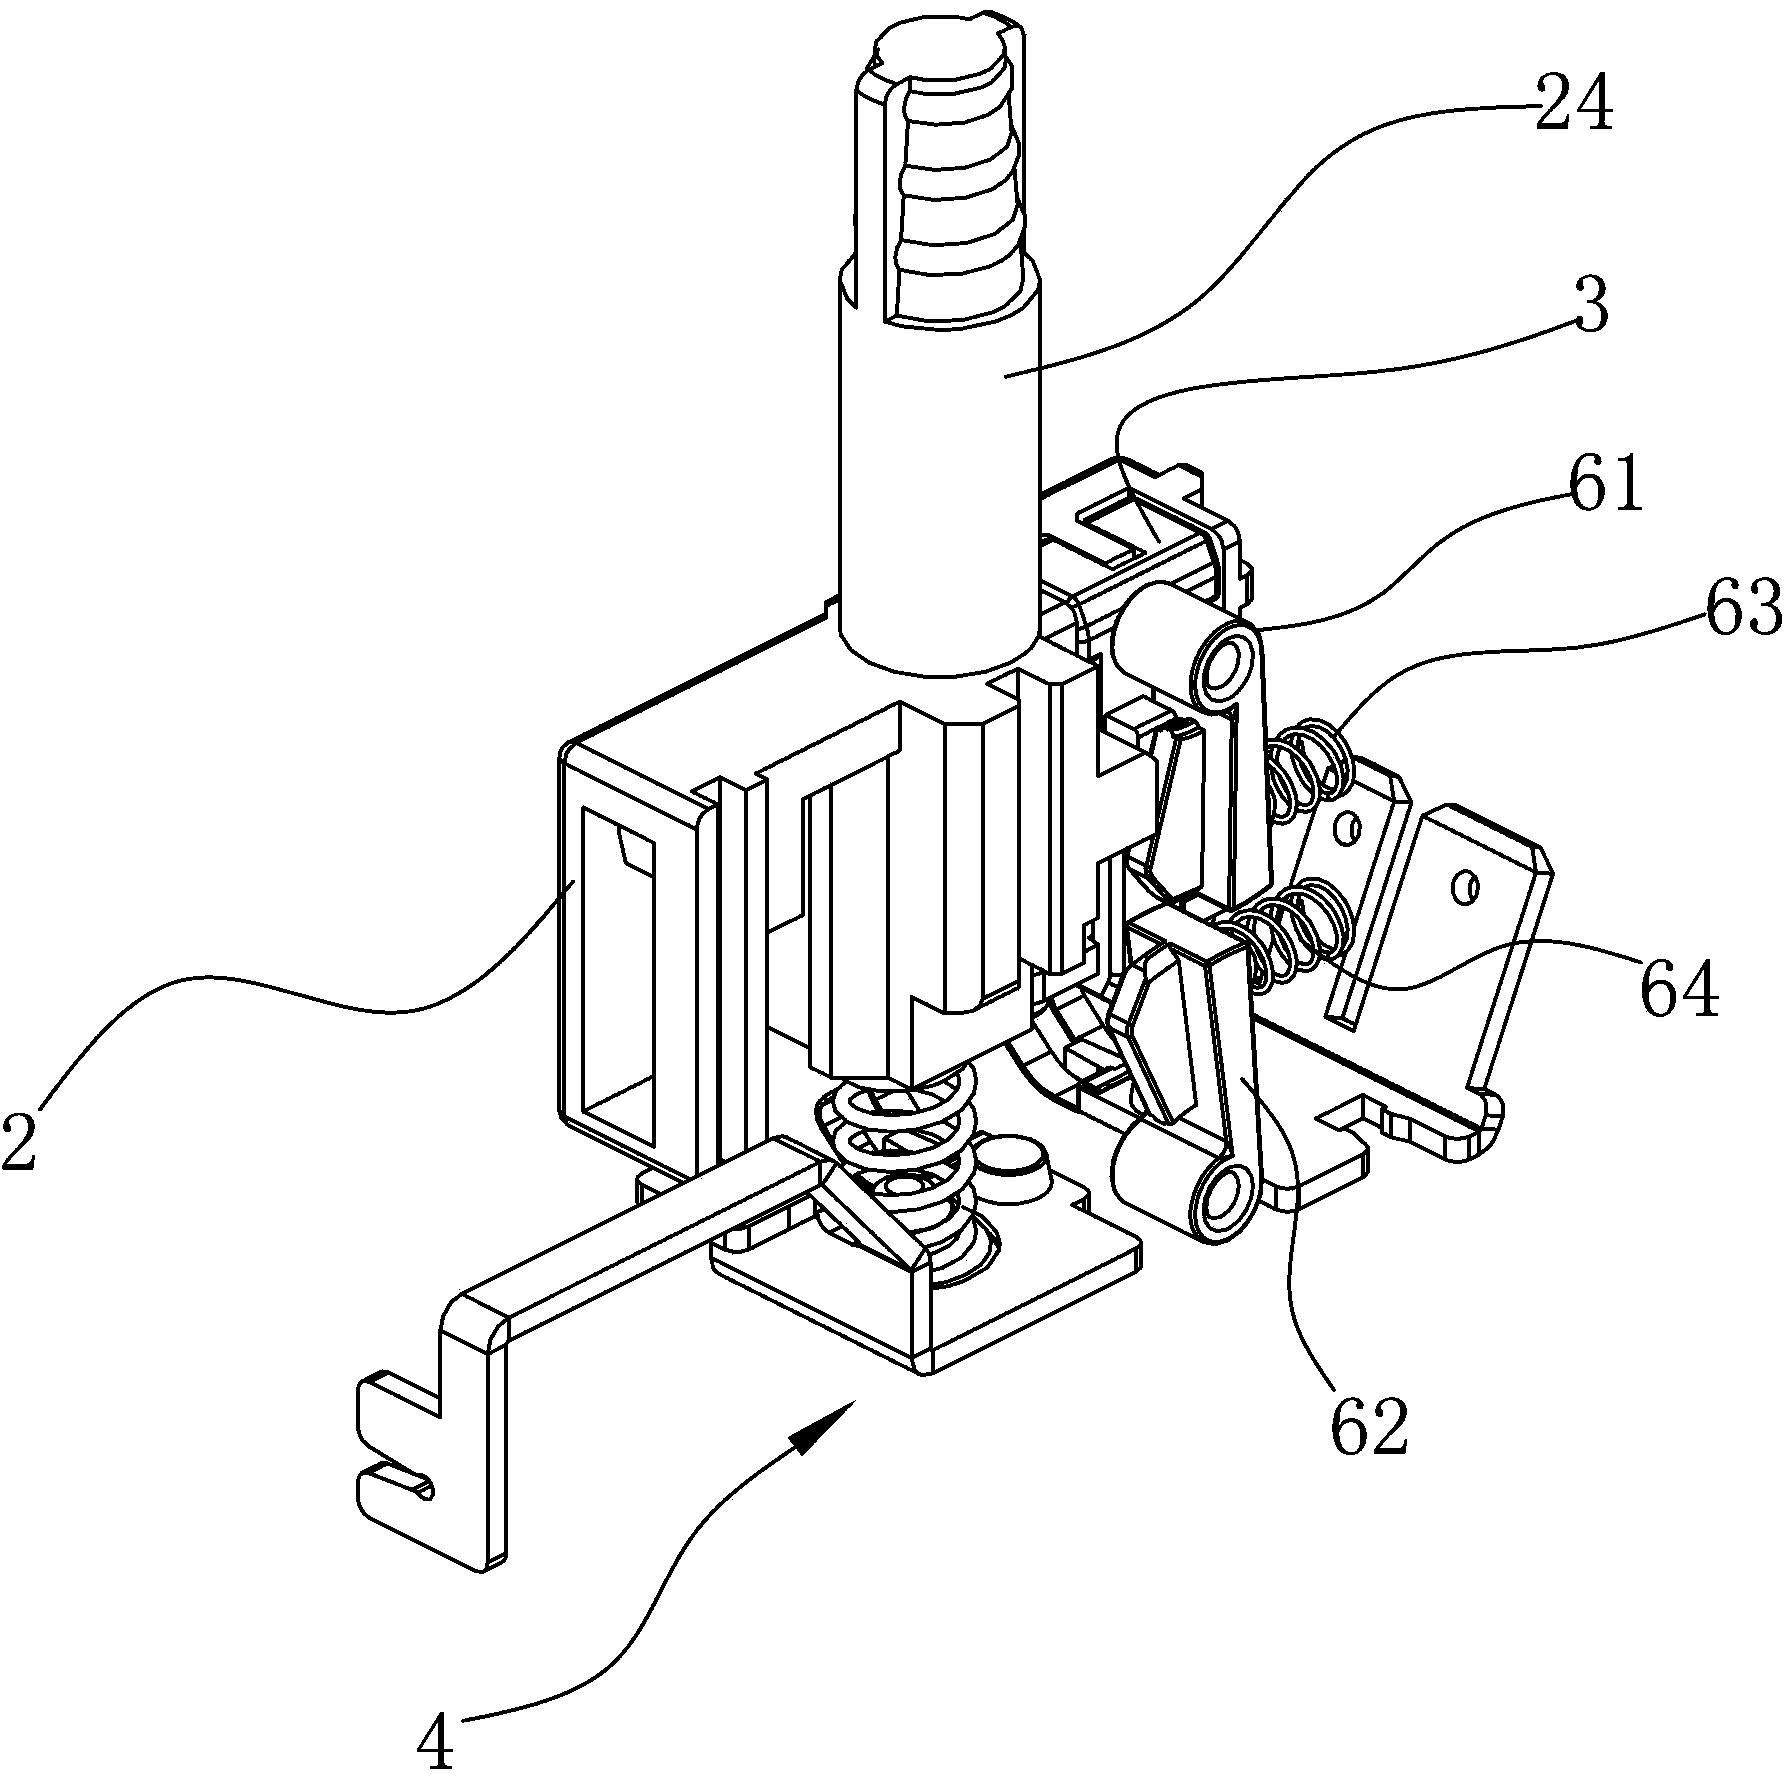 A kind of speed regulating switch with sudden jump function